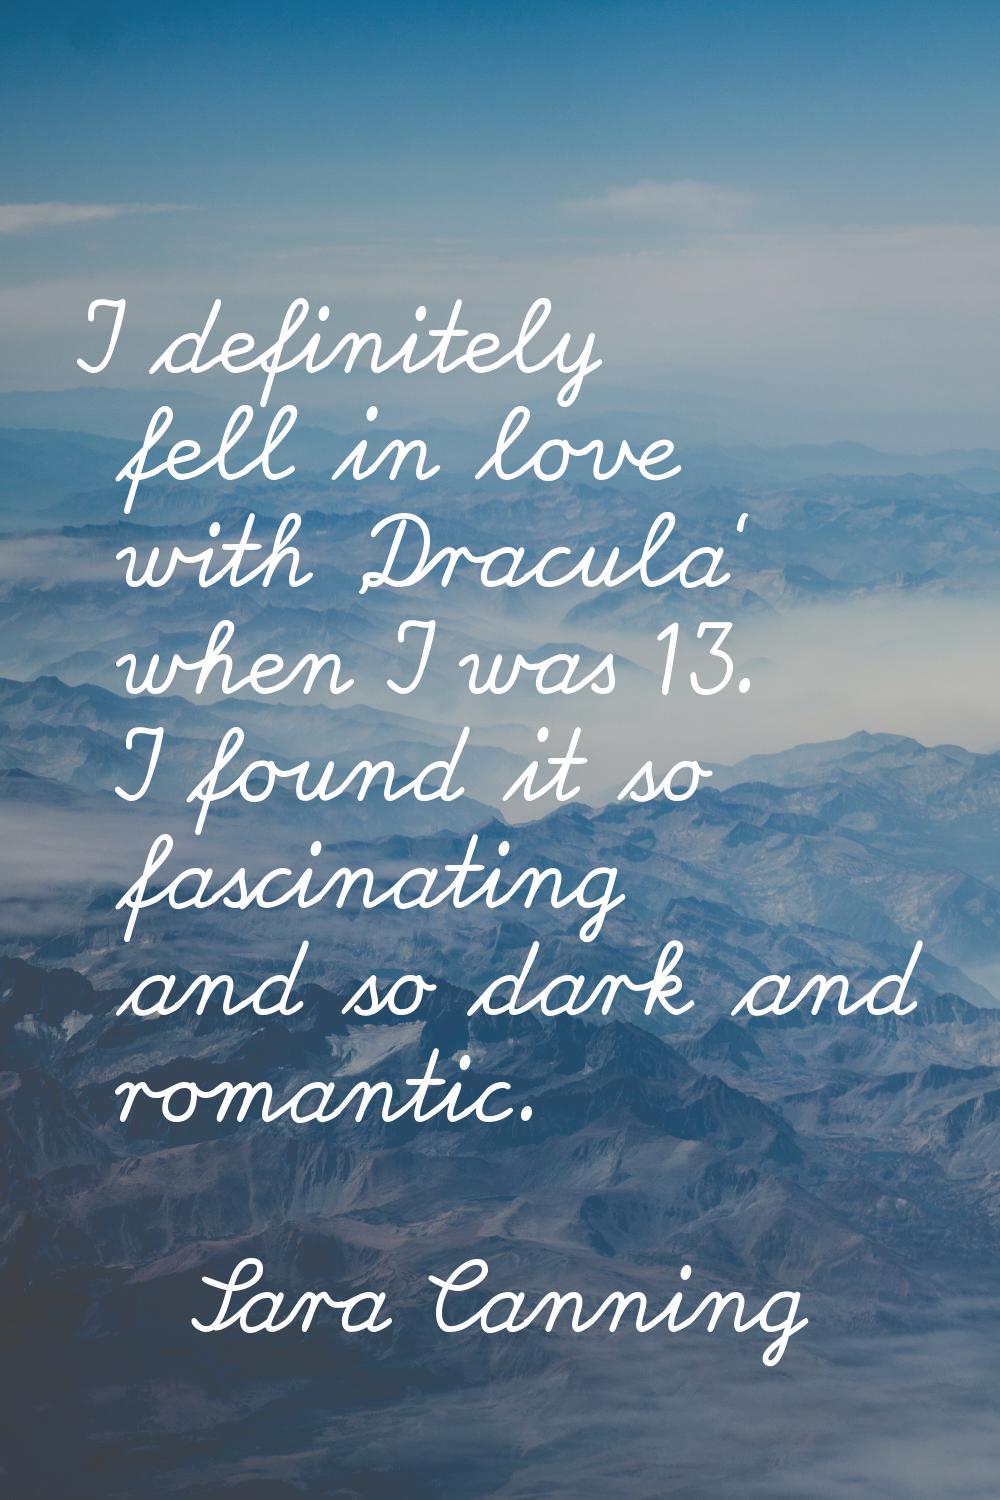 I definitely fell in love with 'Dracula' when I was 13. I found it so fascinating and so dark and r